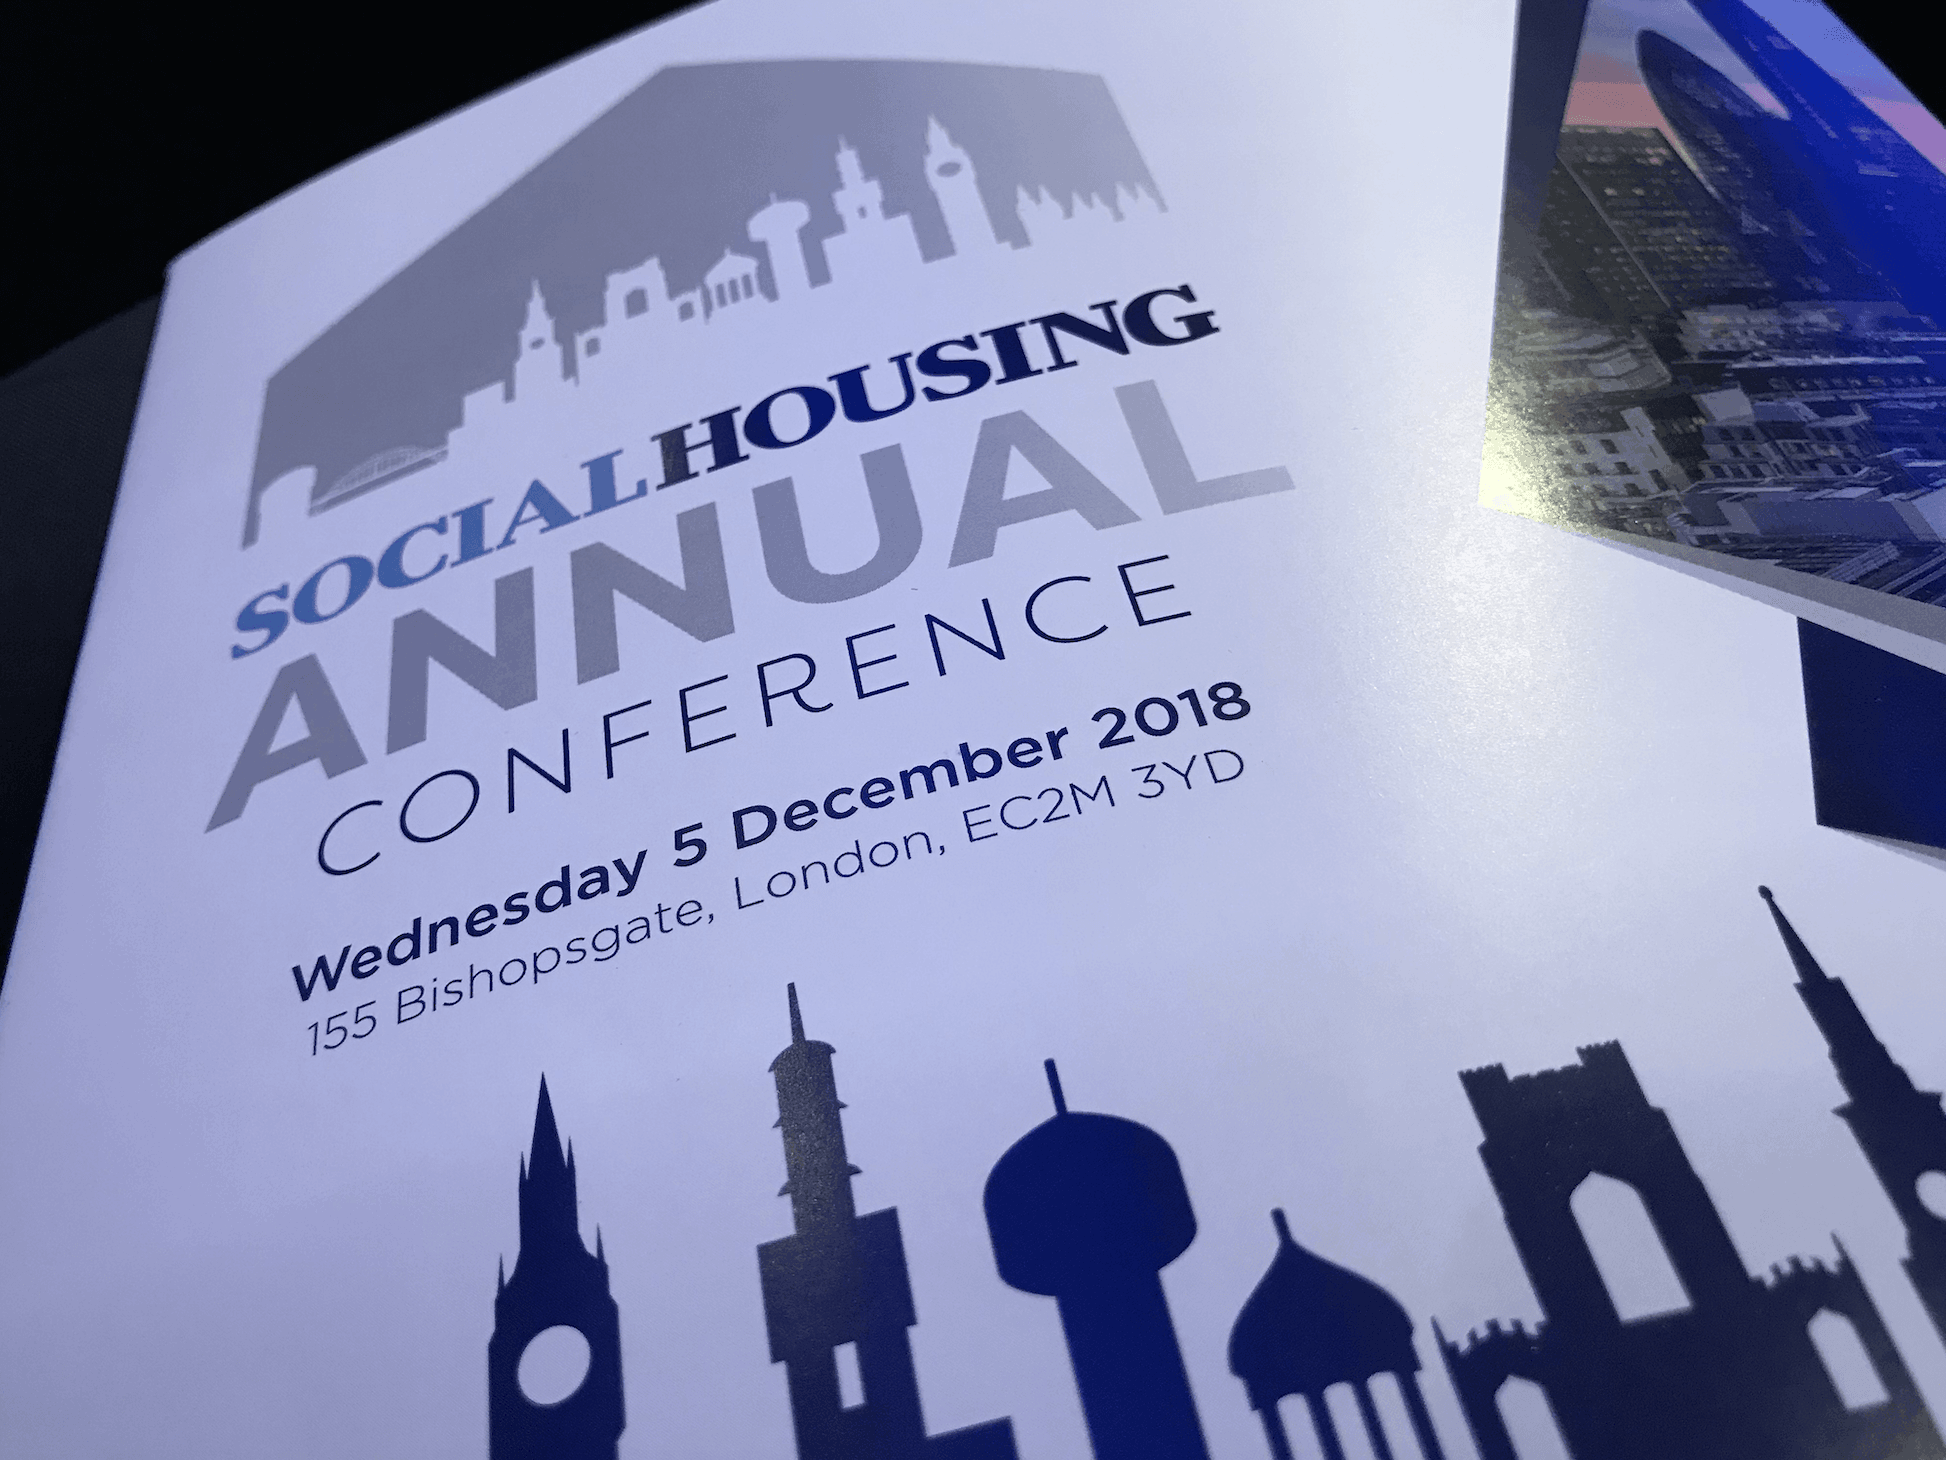 Annual Social Housing Conference